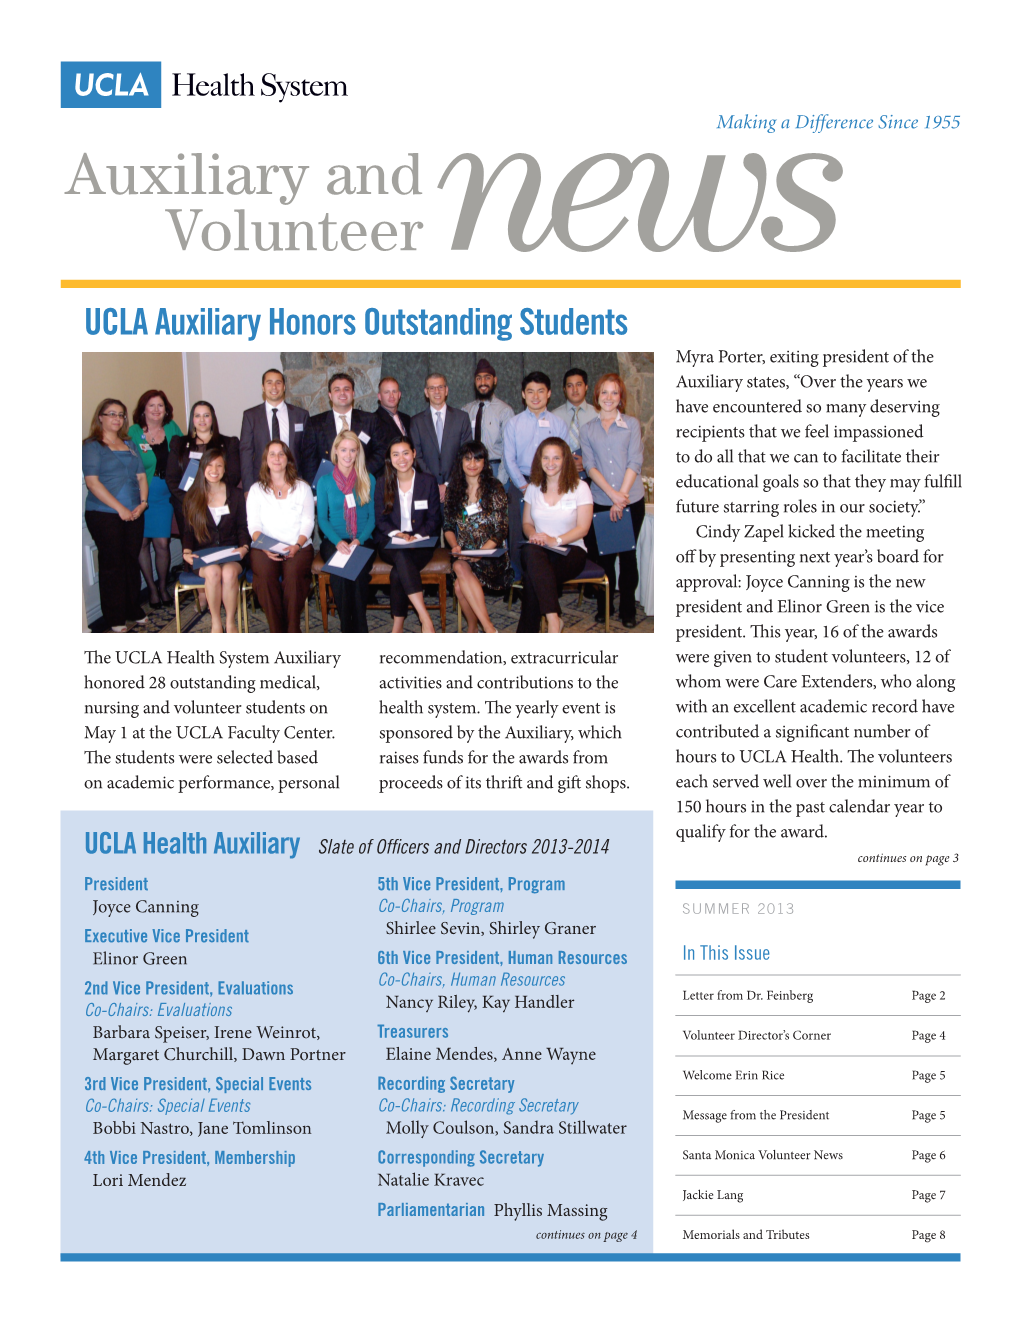 UCLA Auxiliary Honors Outstanding Students